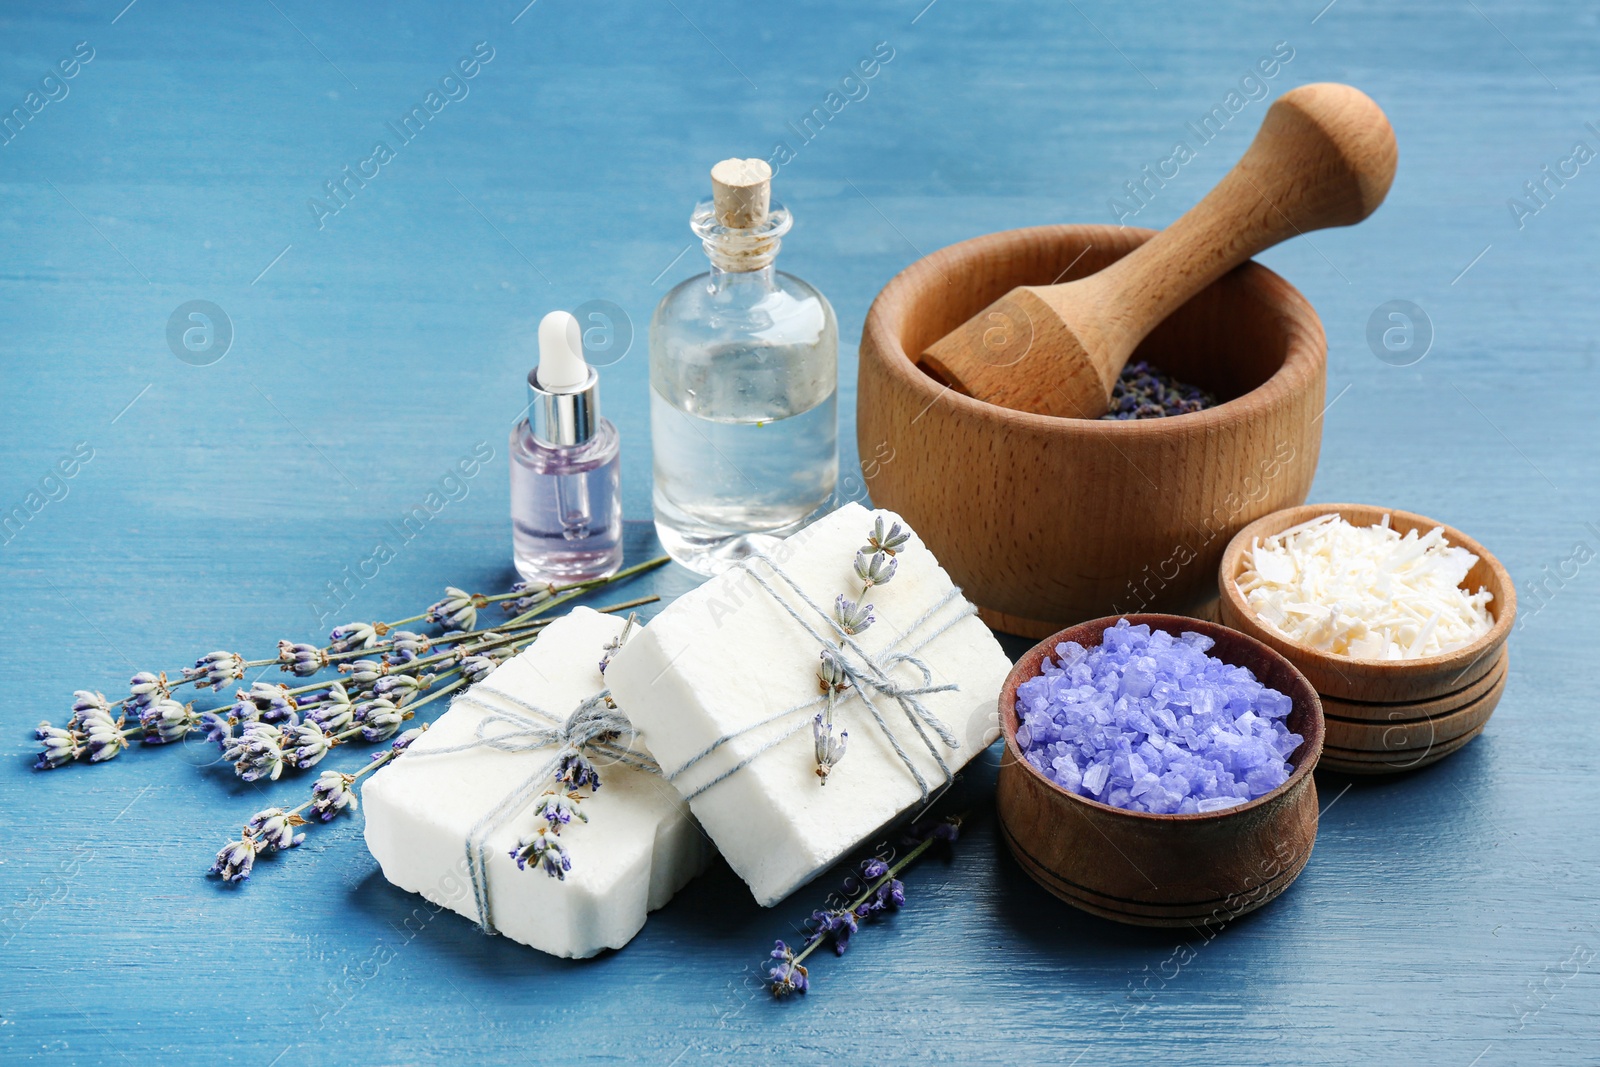 Photo of Handmade soap bars with lavender flowers and ingredients on blue wooden table